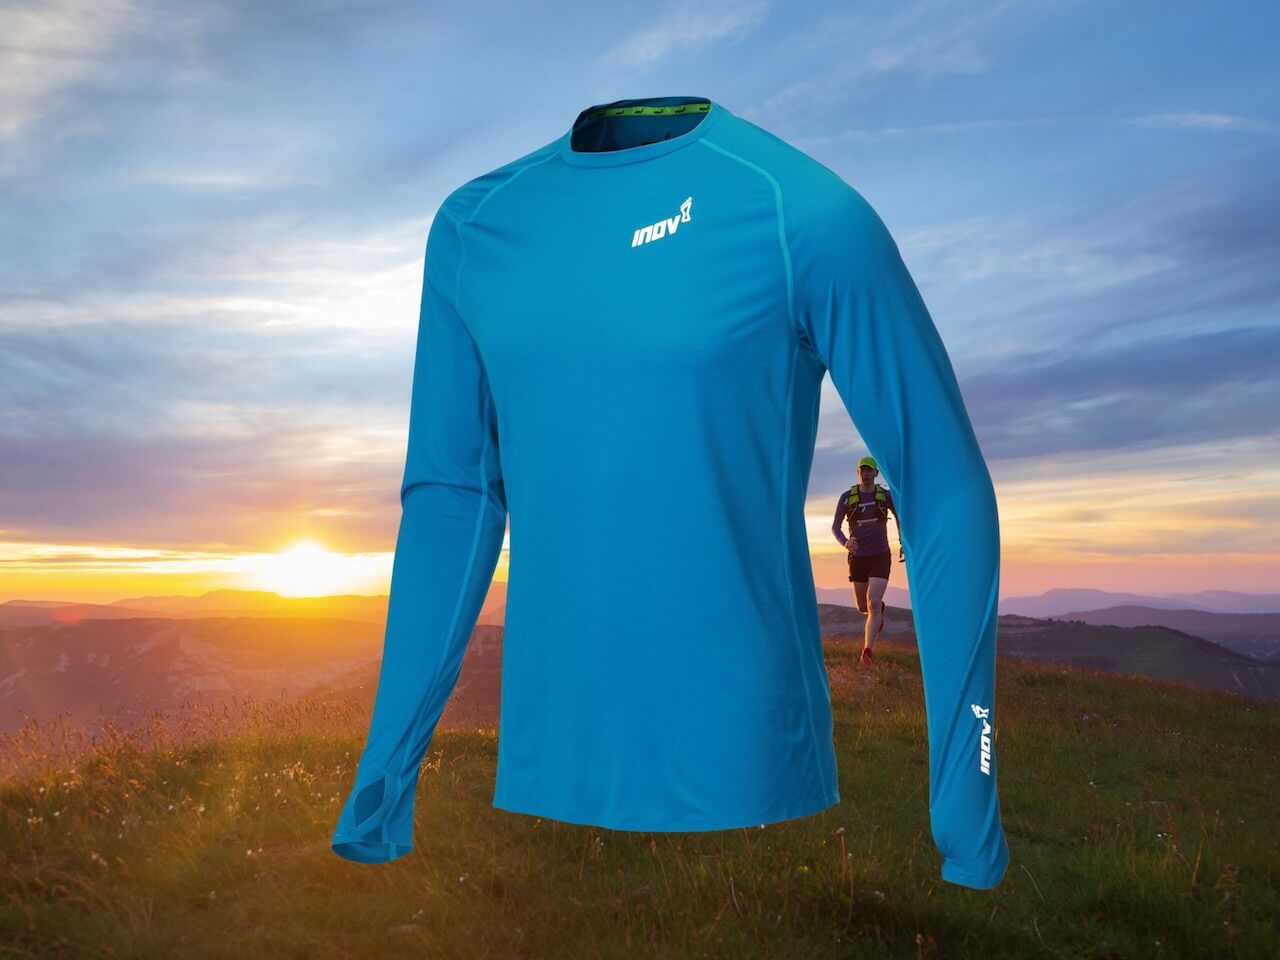 Featured image for “Test: Inov-8 Base Elite Long Sleeve”